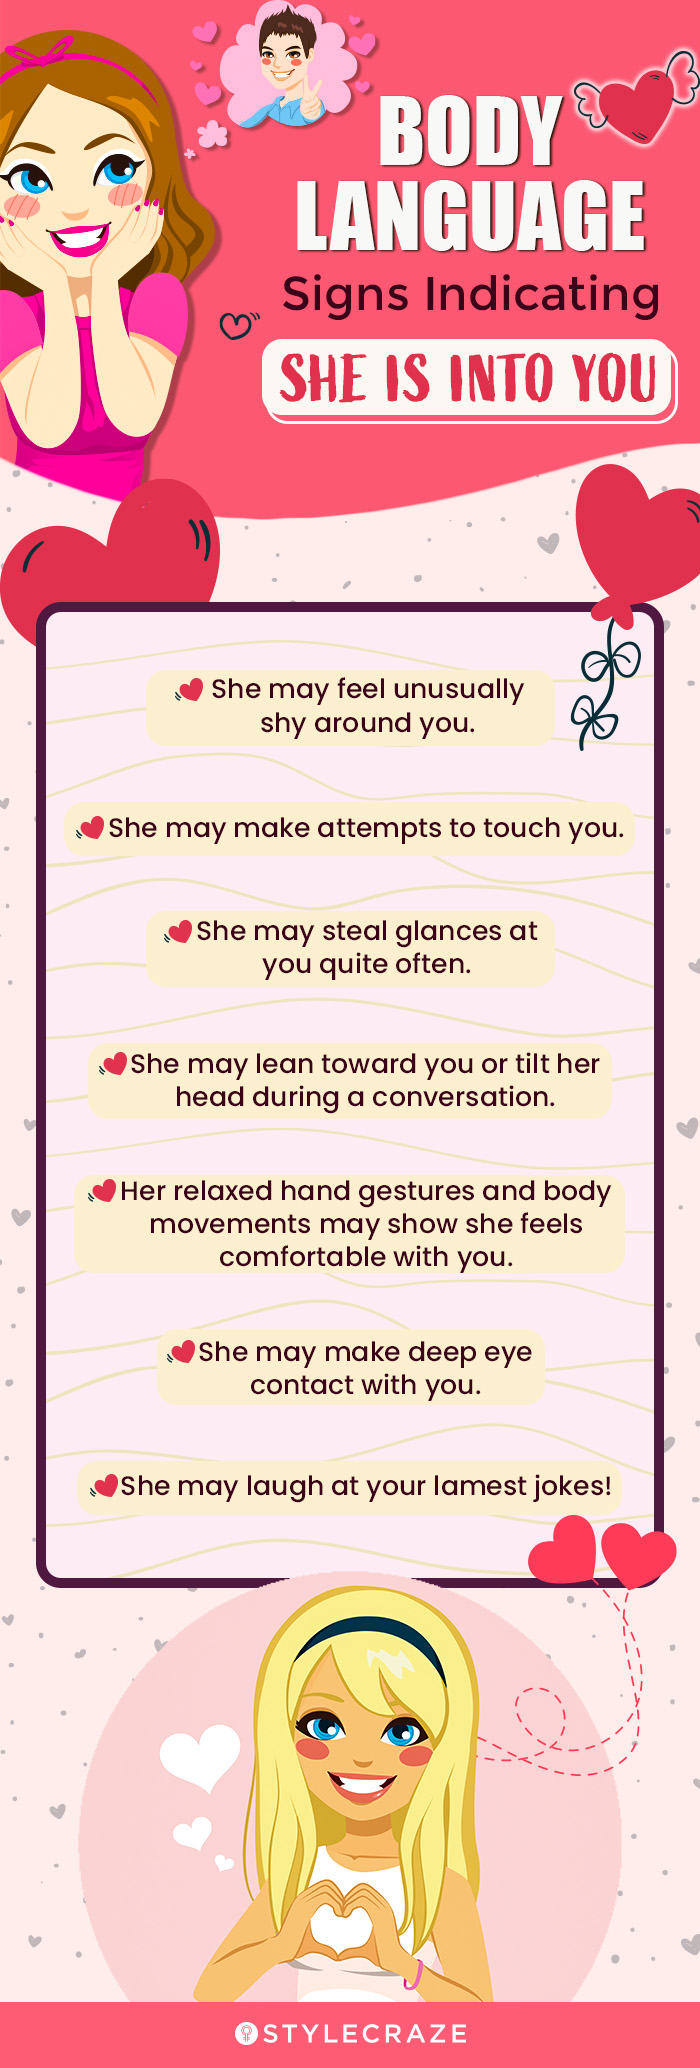 body language signs indicating she is into you (infographic)